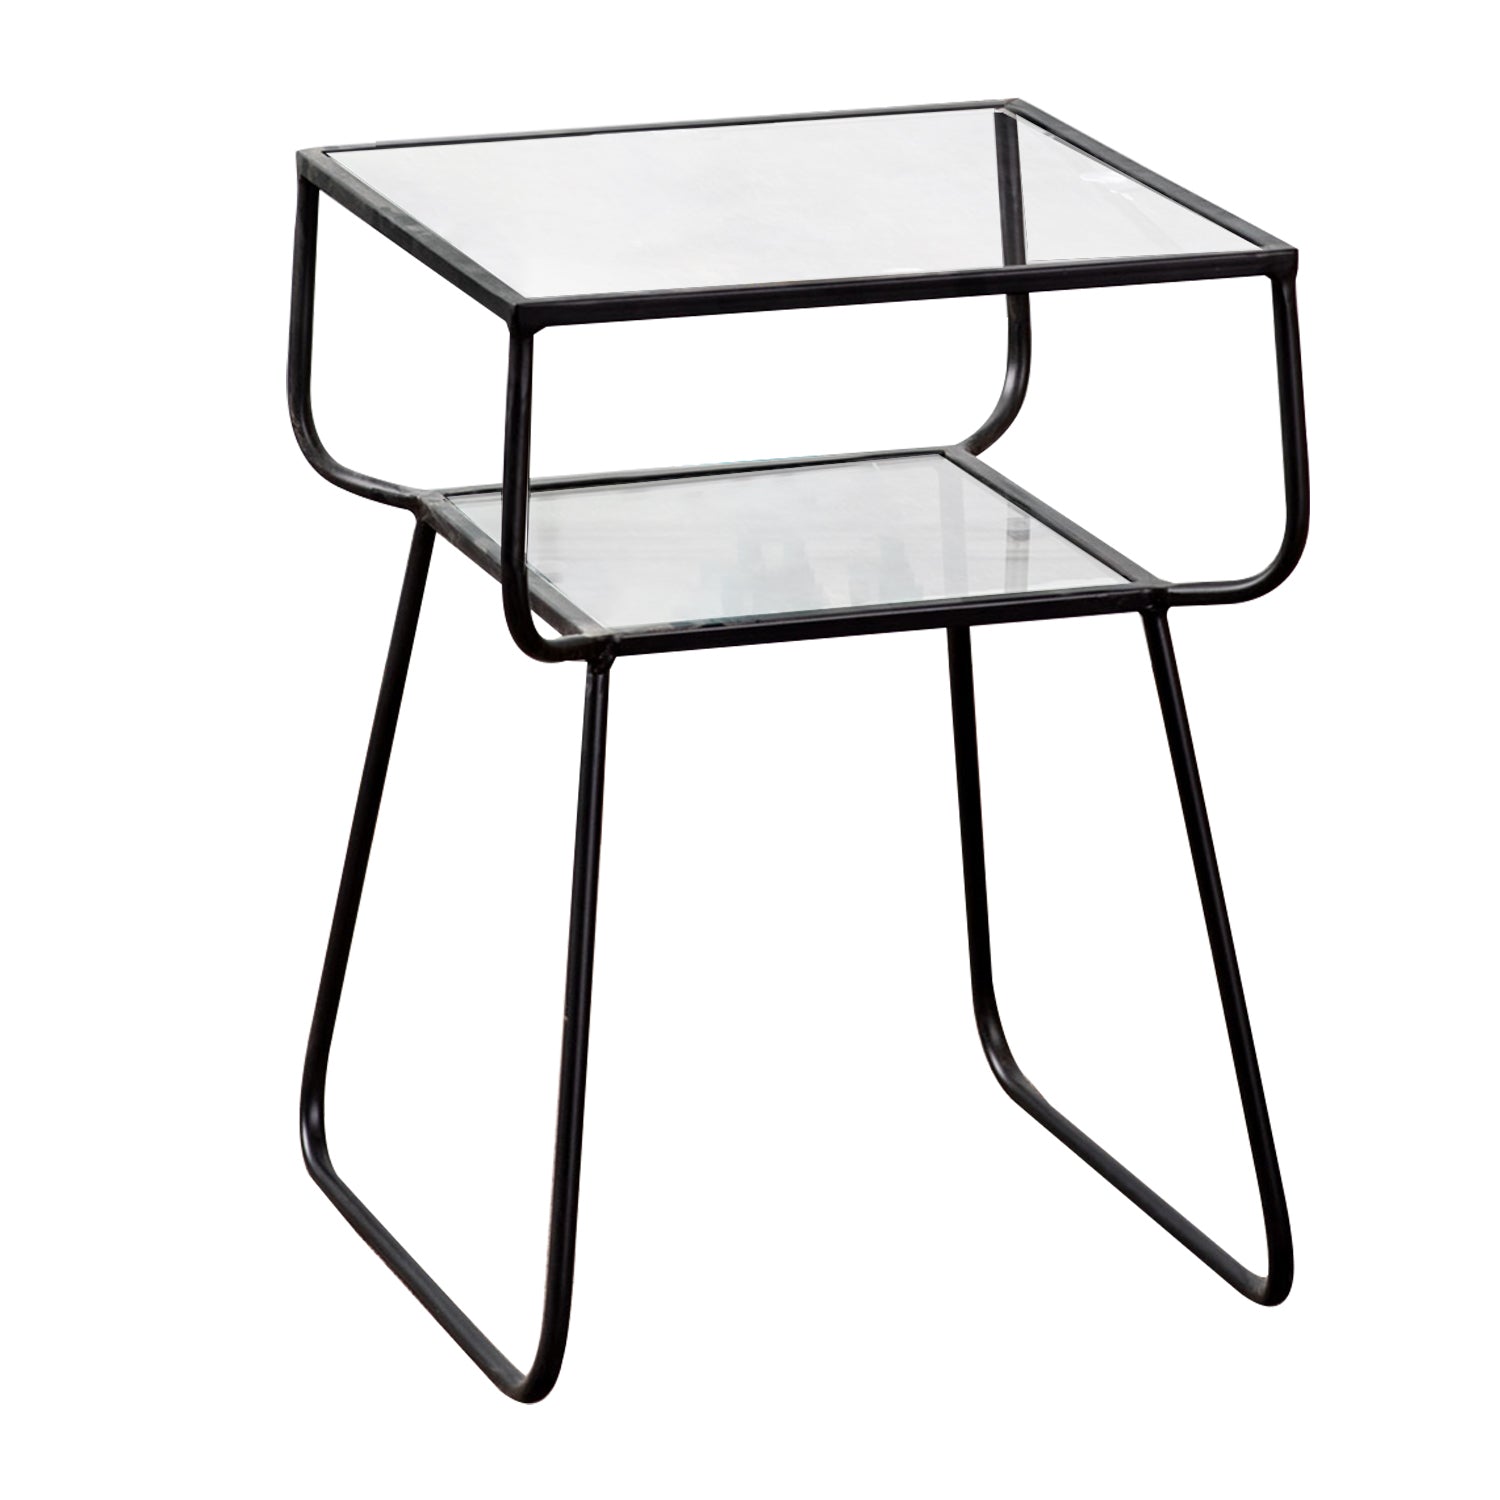 2 tier glass side table